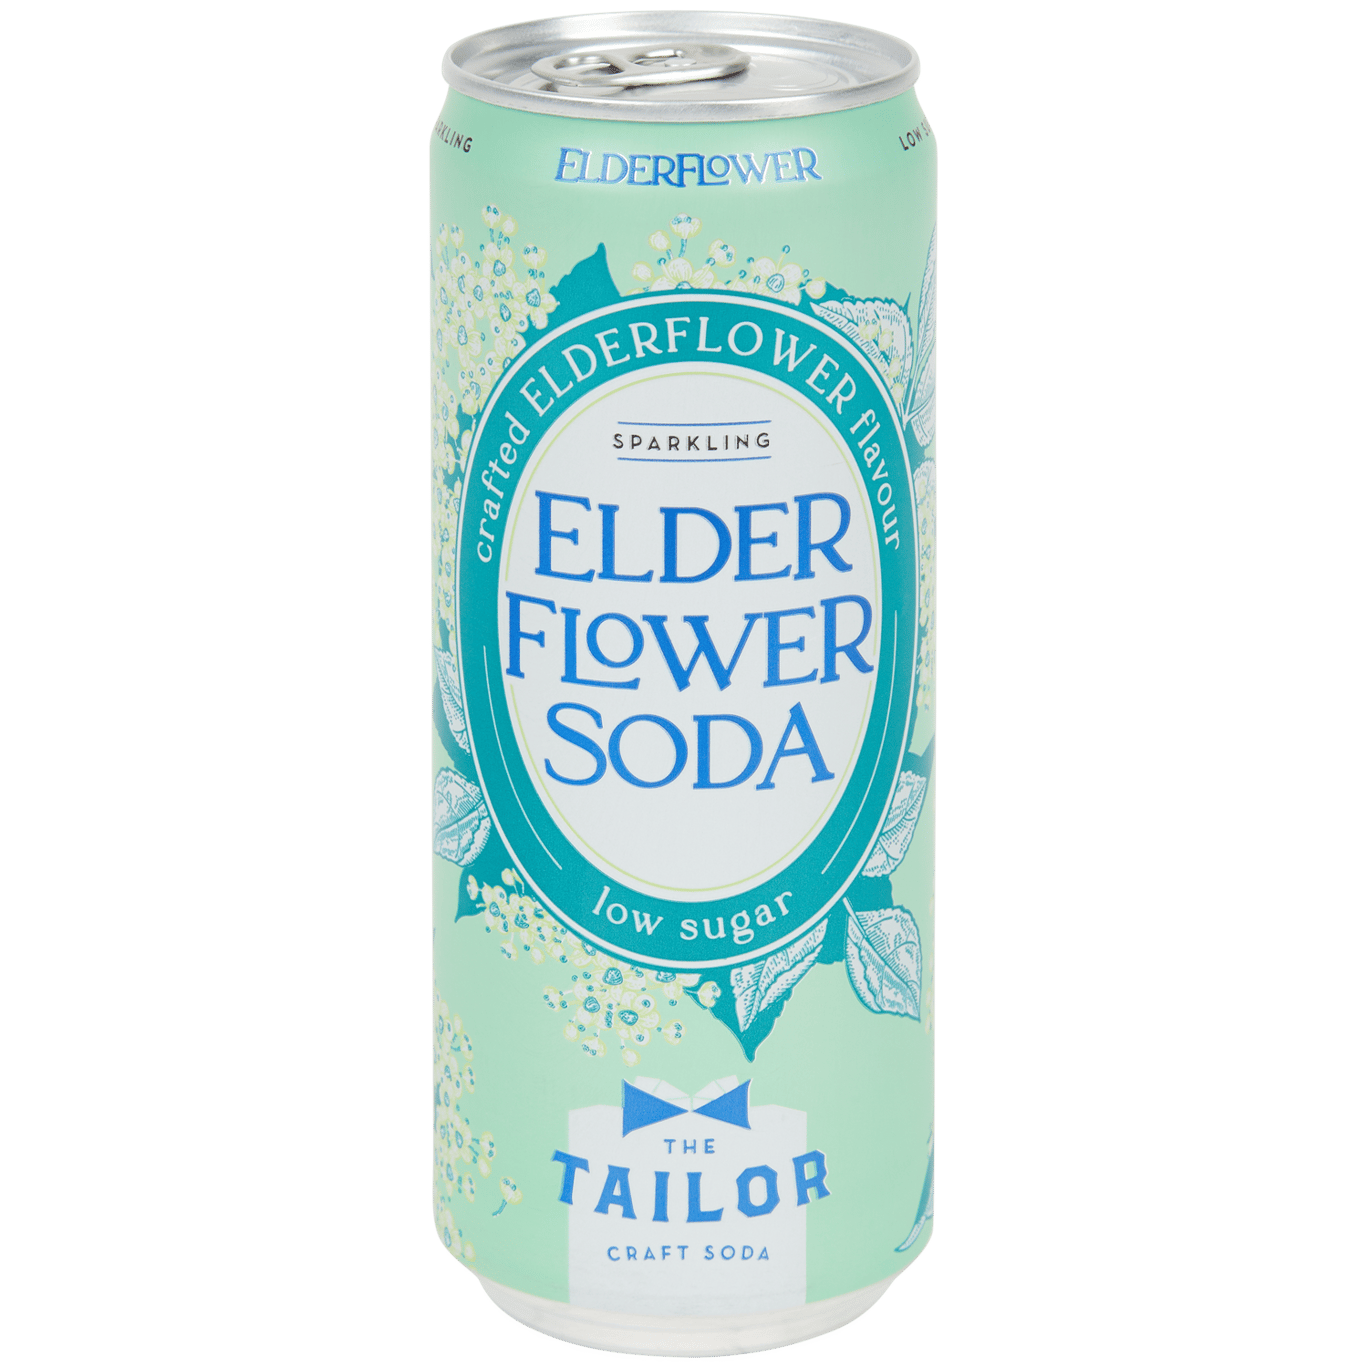 The Tailor Craft Soda